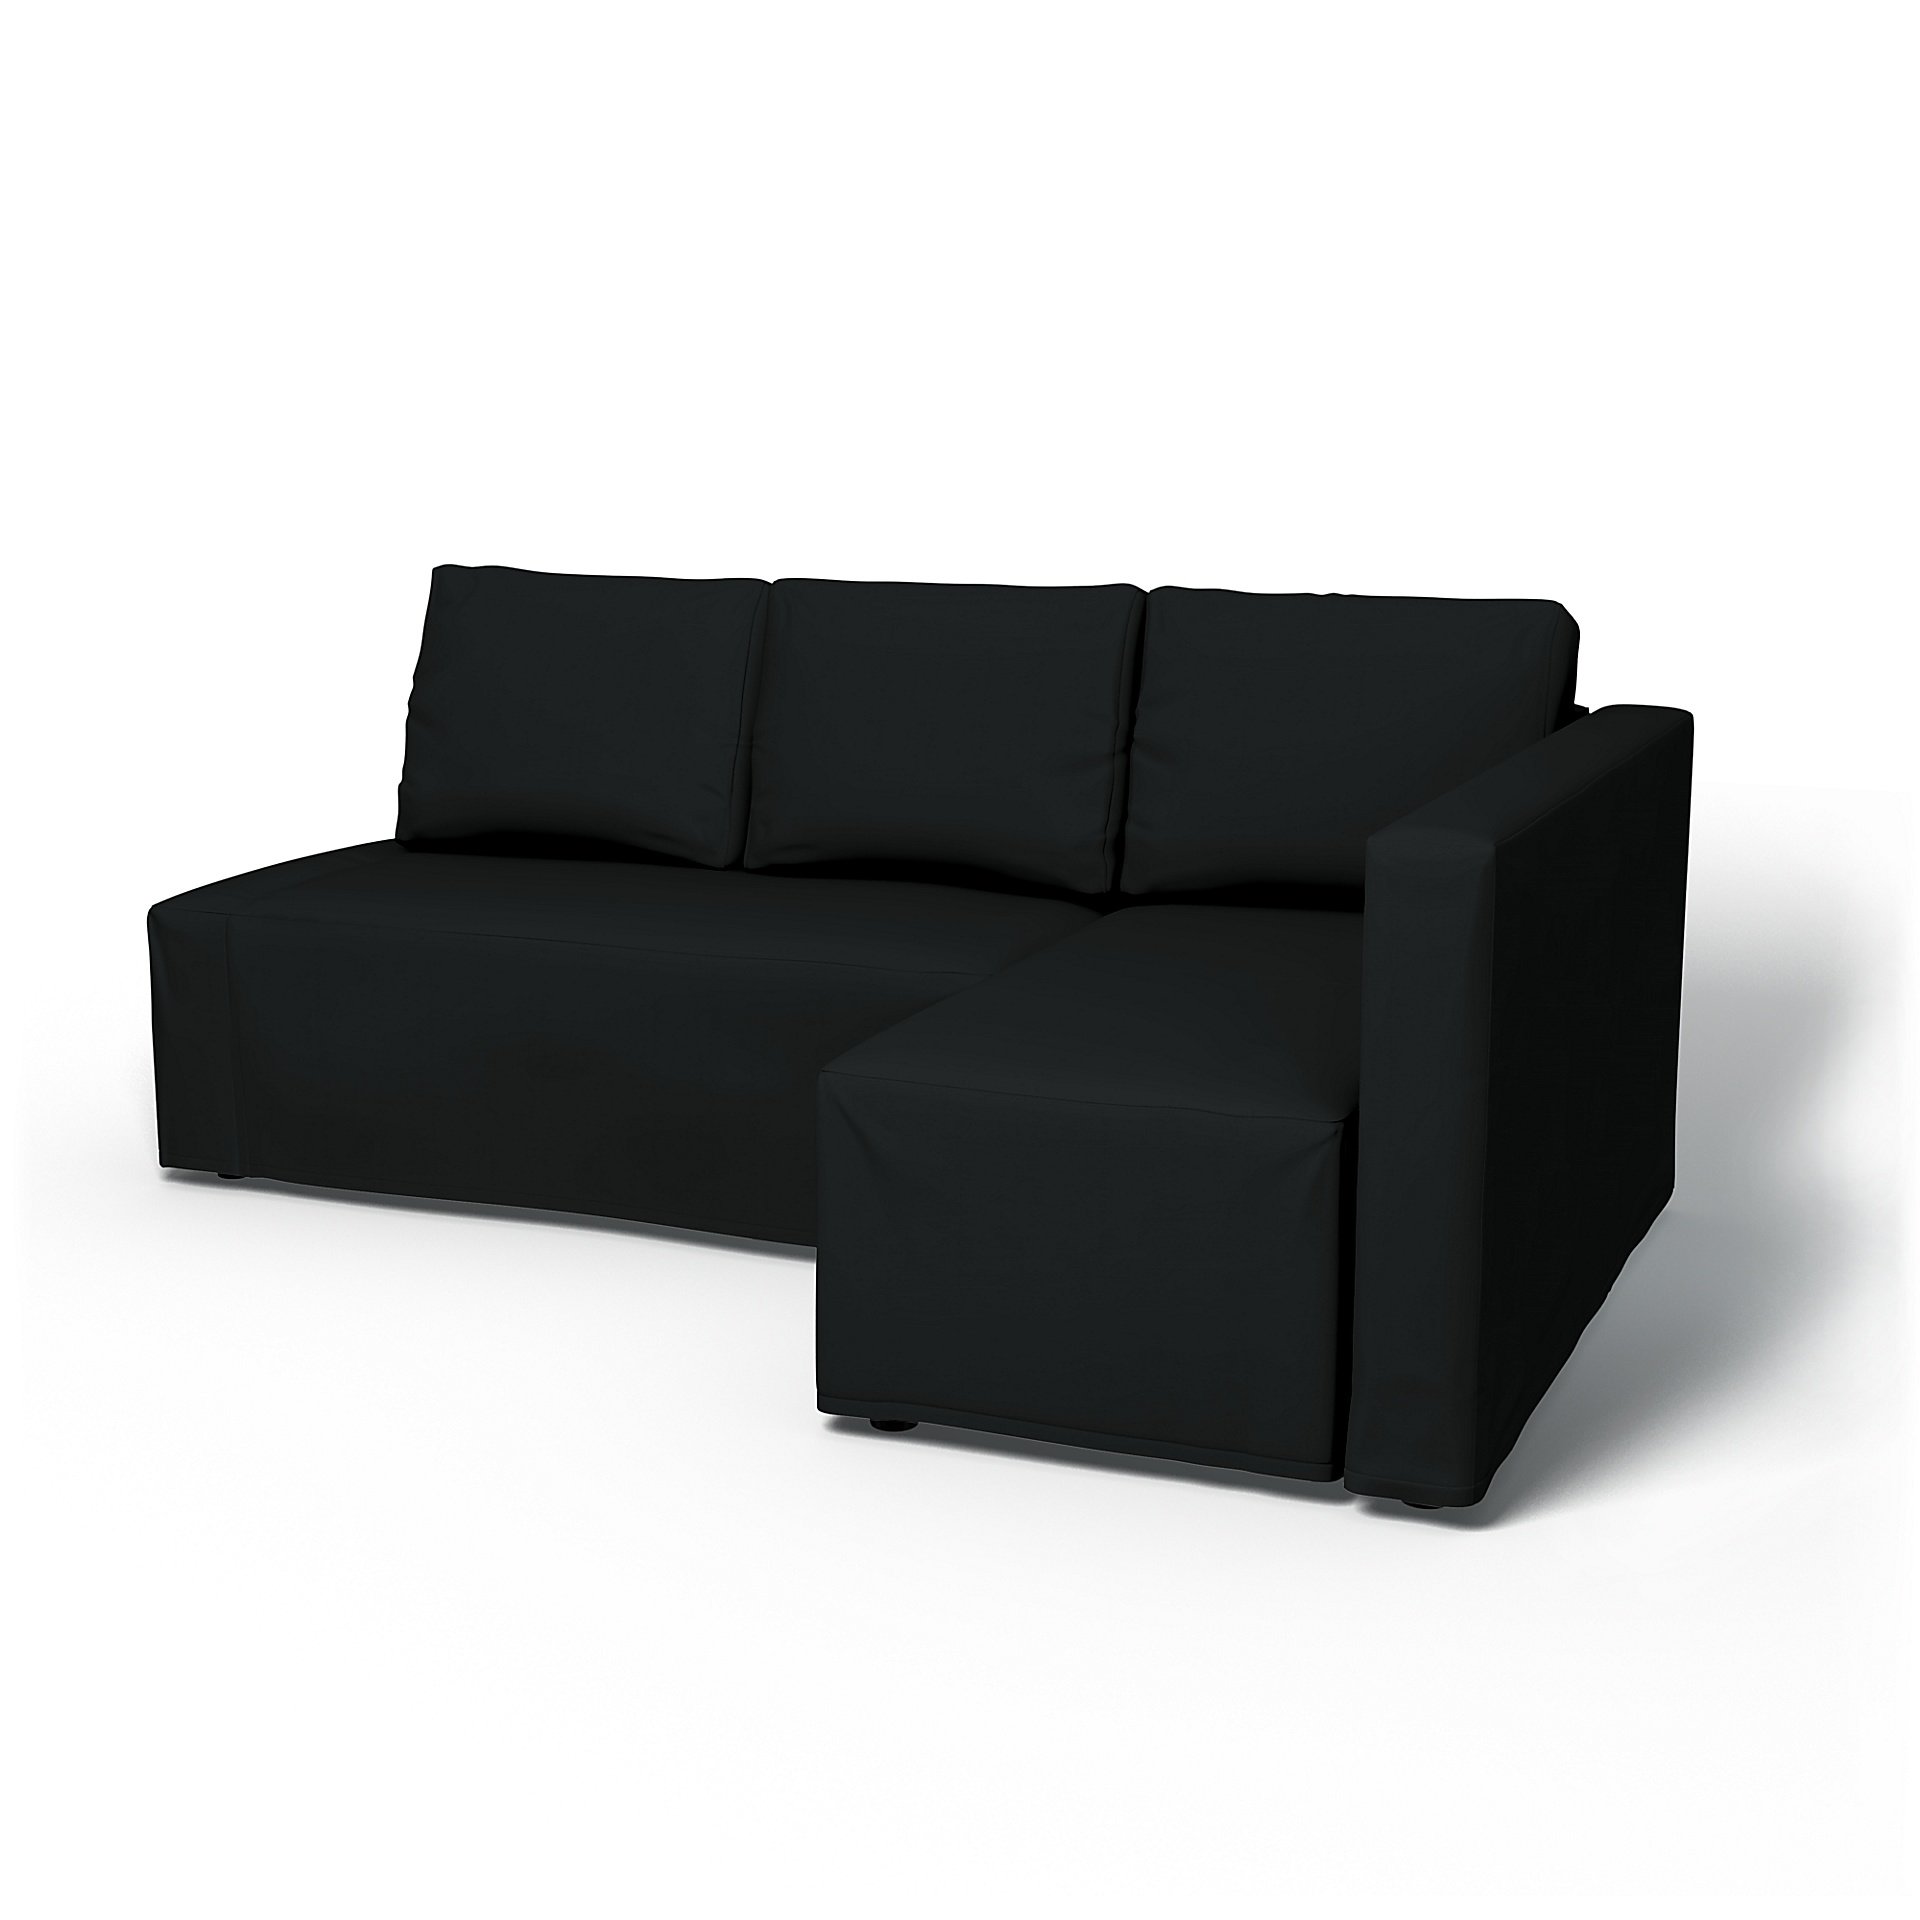 IKEA - Friheten Sofa Bed with Right Chaise Cover, Jet Black, Cotton - Bemz